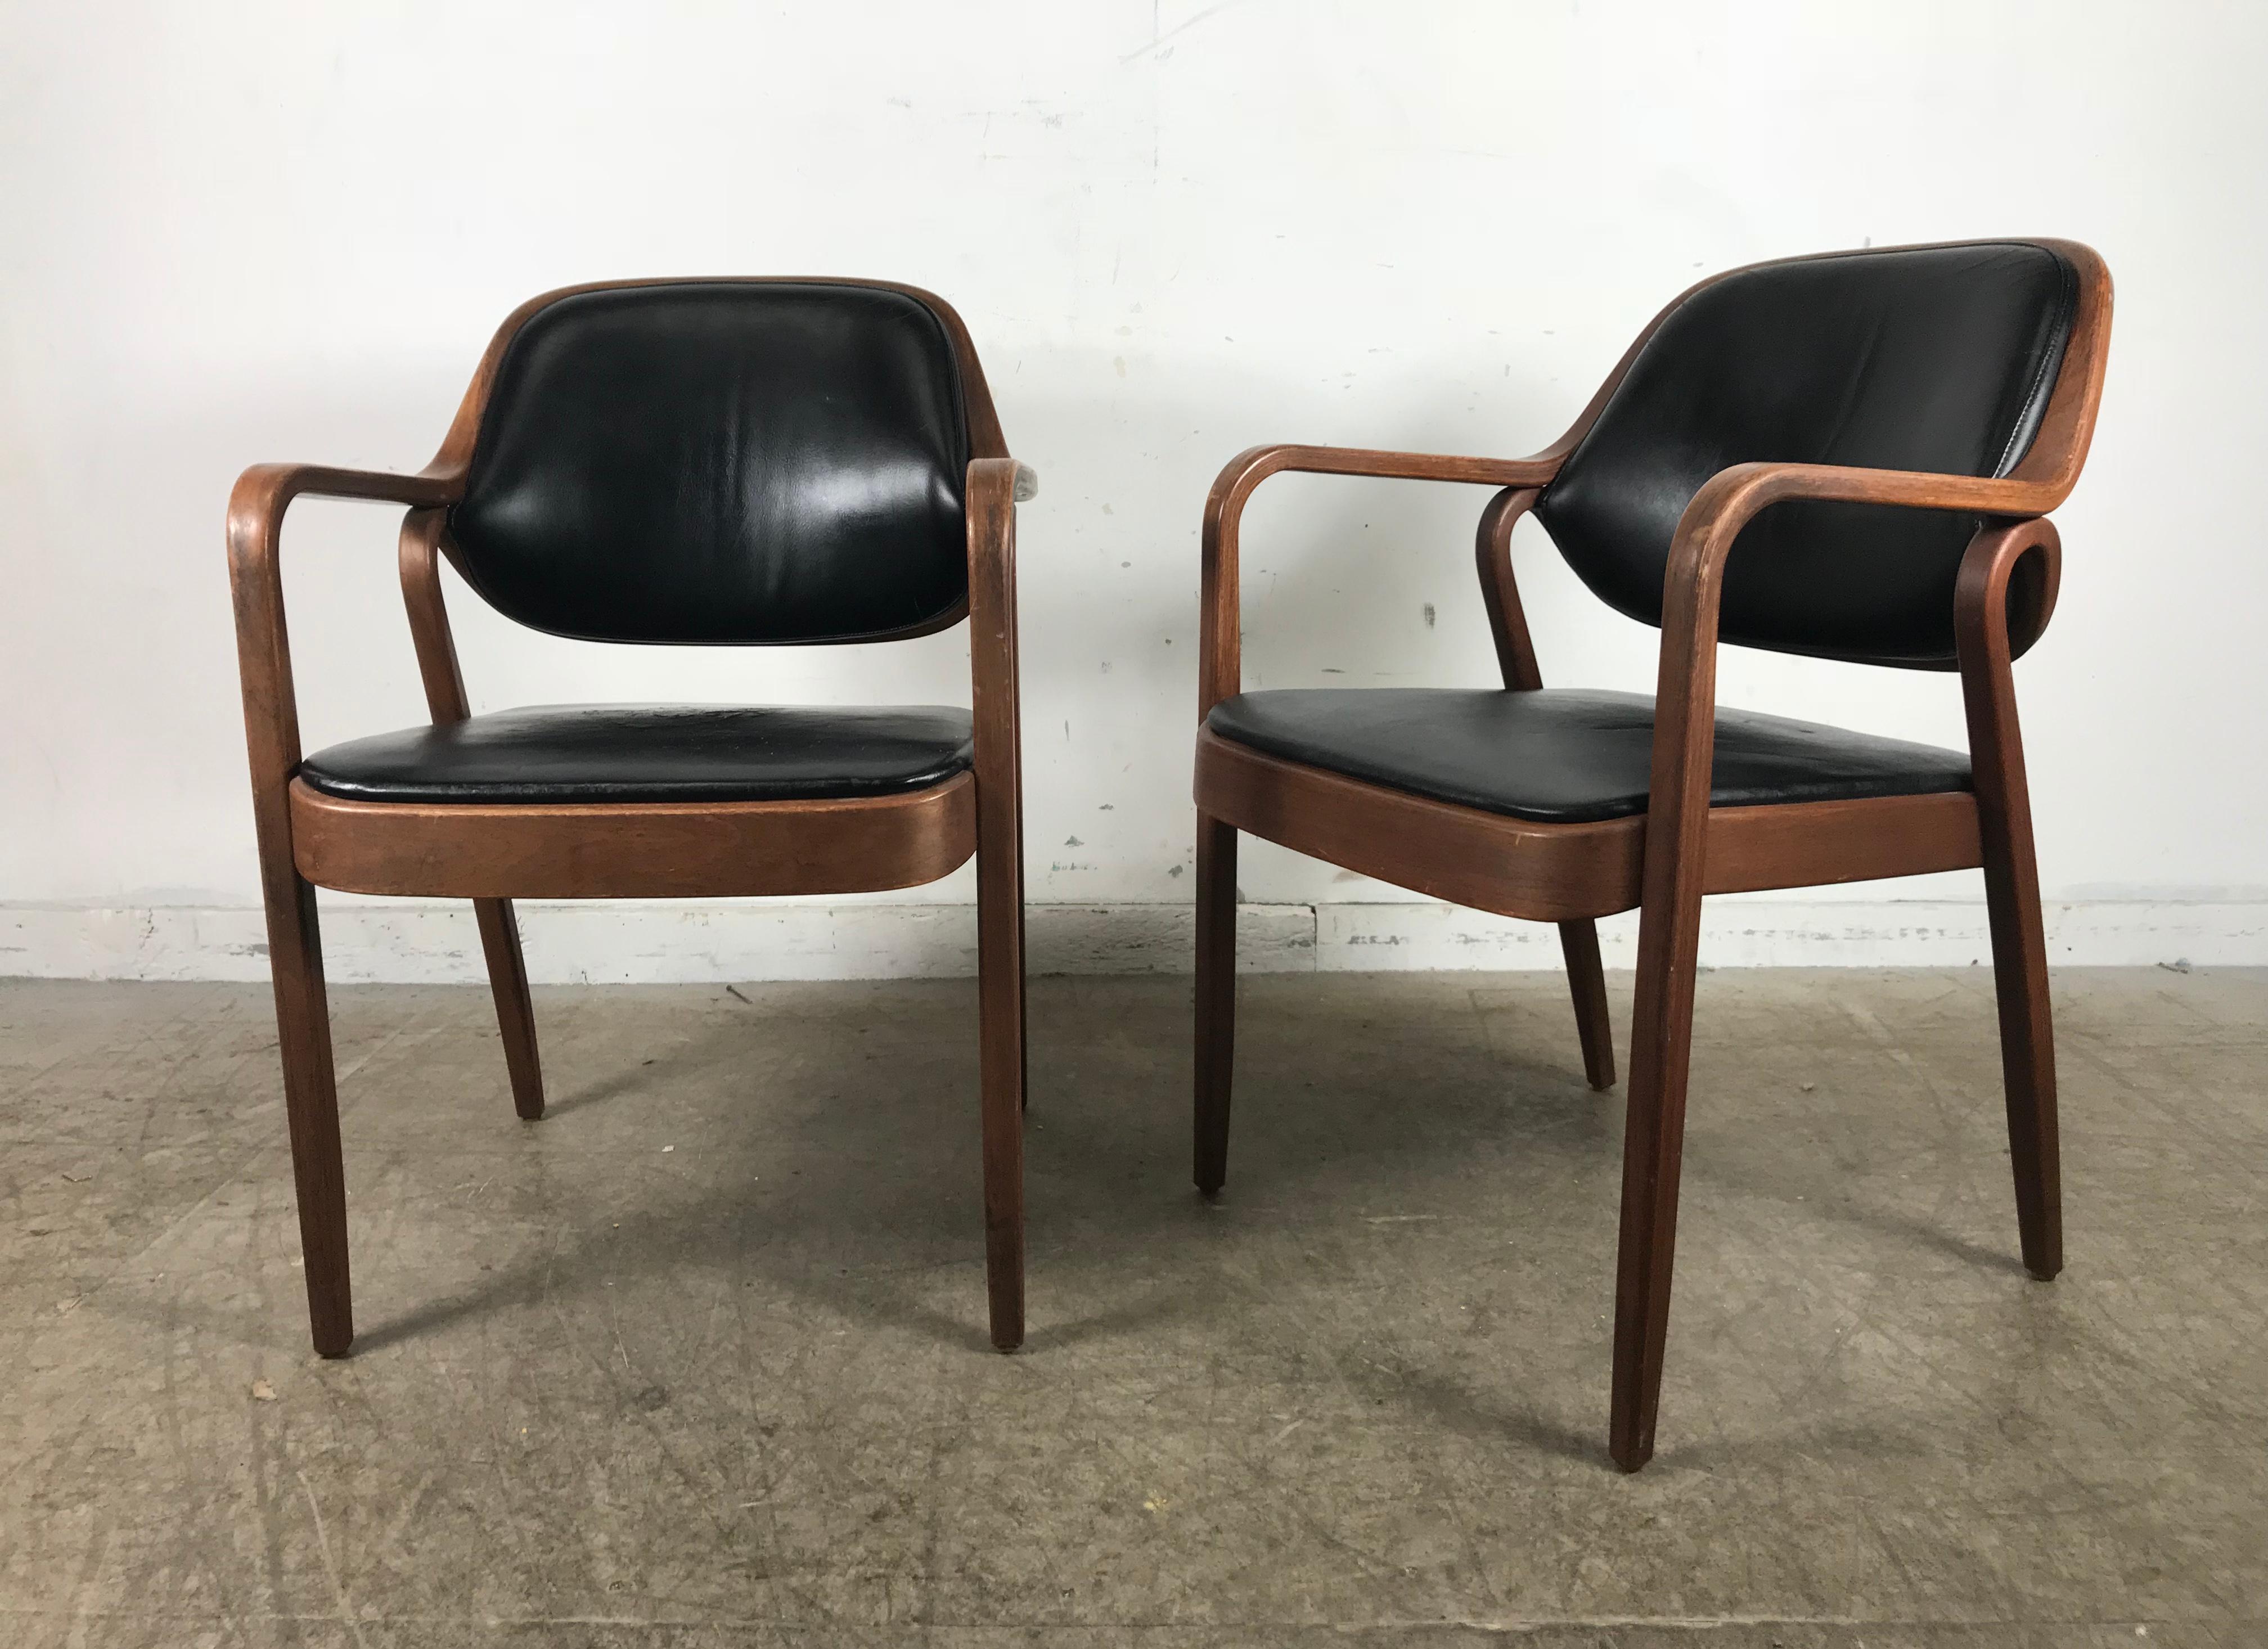 Pair of modernist bentwood mahogany and leather chairs by Don Pettit for Knoll, nice original condition. Minor wear and crazing to original black leather seat and back. Retain original early KNOLL labels.